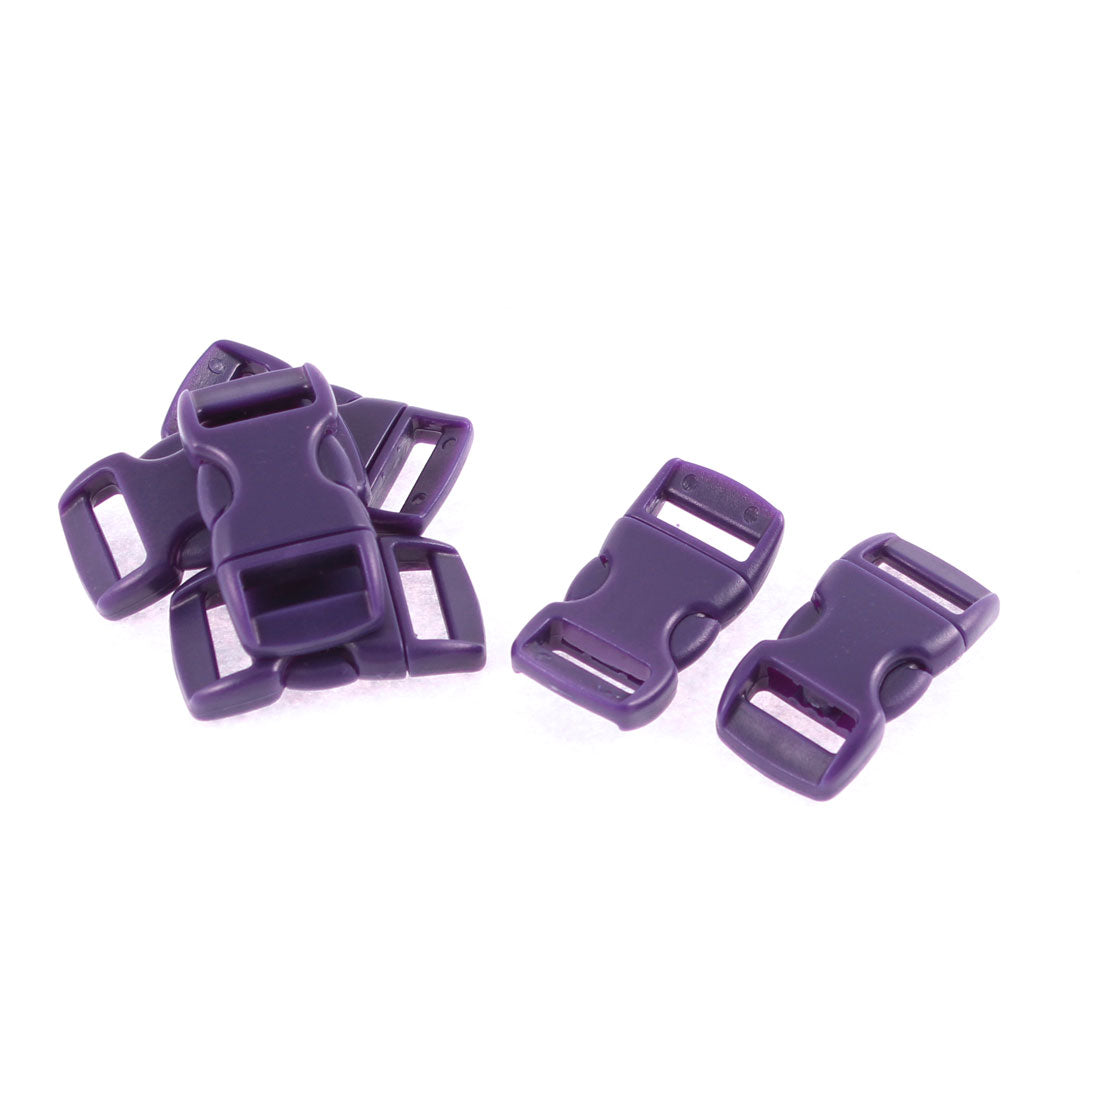 uxcell Uxcell Backpack Plastic Replacement Side Release Buckle Dark Purple 11mm Width Strap Band 6 Pcs